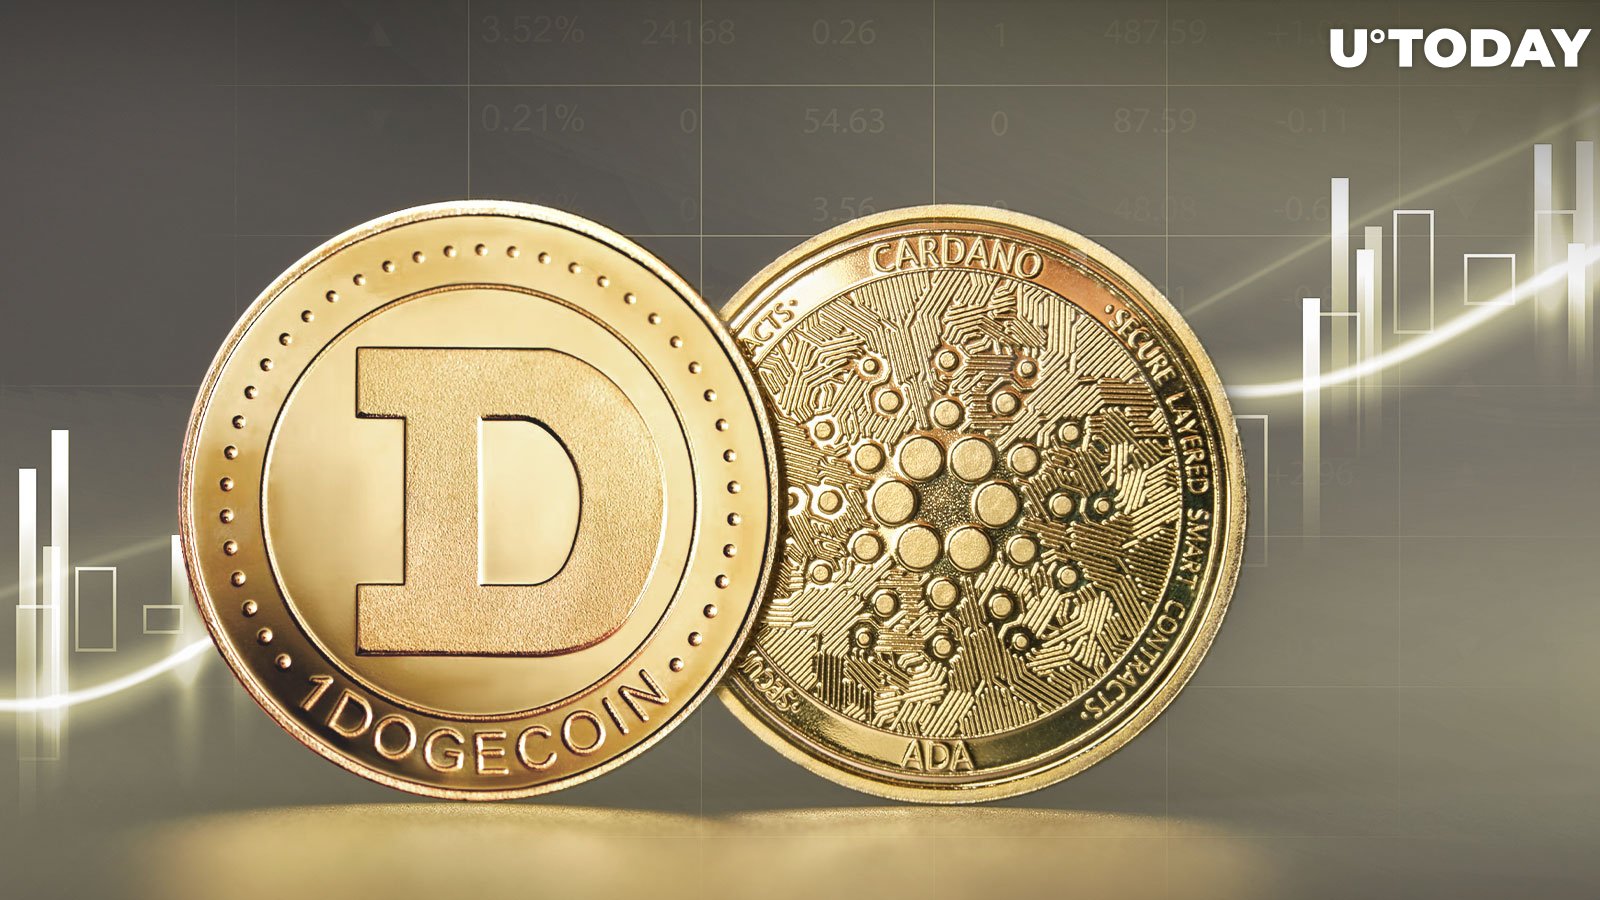 Dogecoin surpasses Cardano by market cap once again